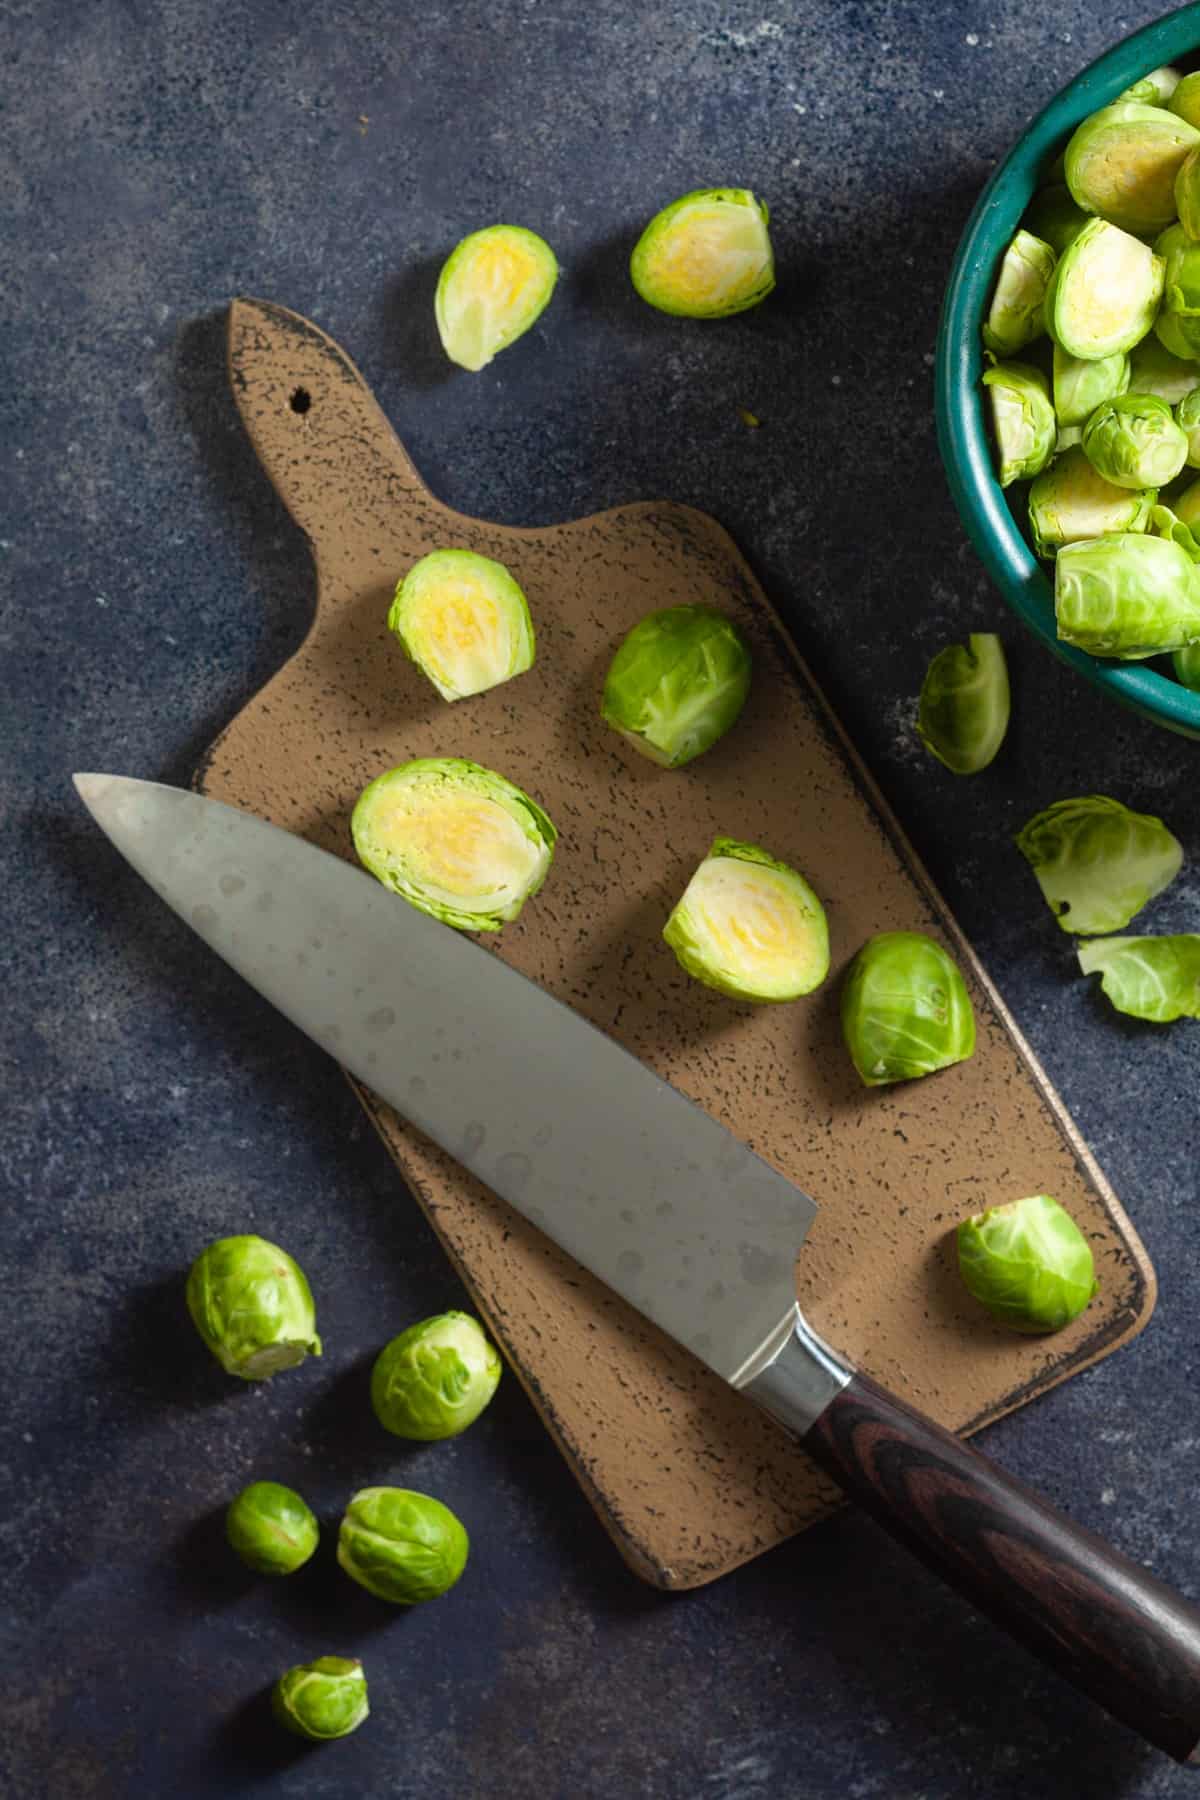 slicing and trimming Brussels sprouts